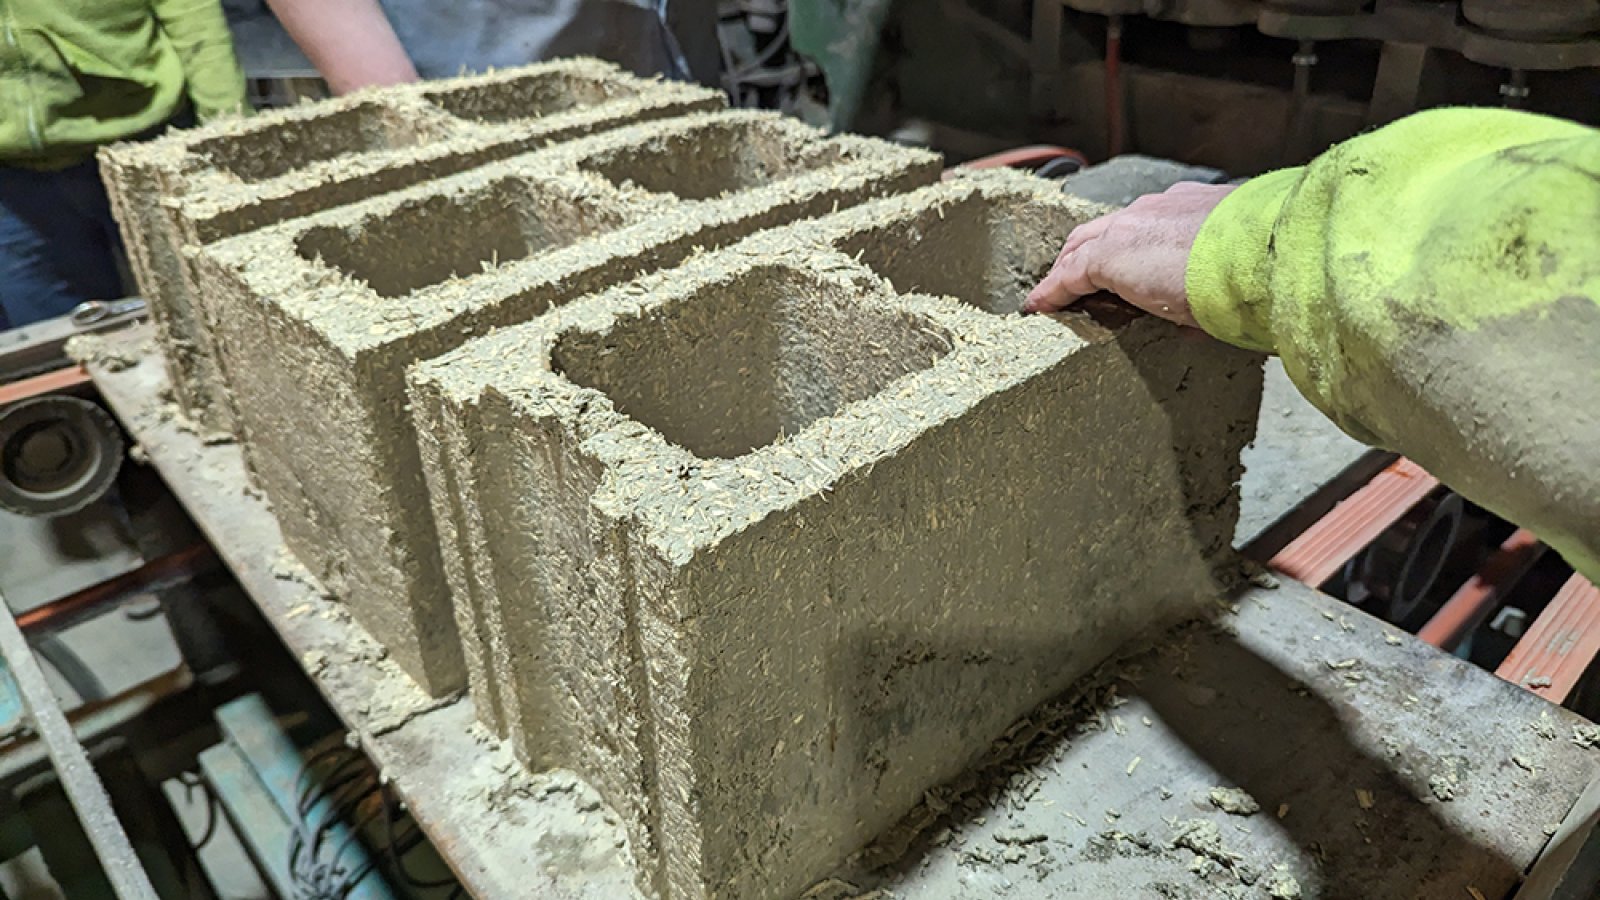 Marc Maguire and his research team poured 500 cinder blocks recently using a new, plant-based mixture featuring the core of hemp plants. 